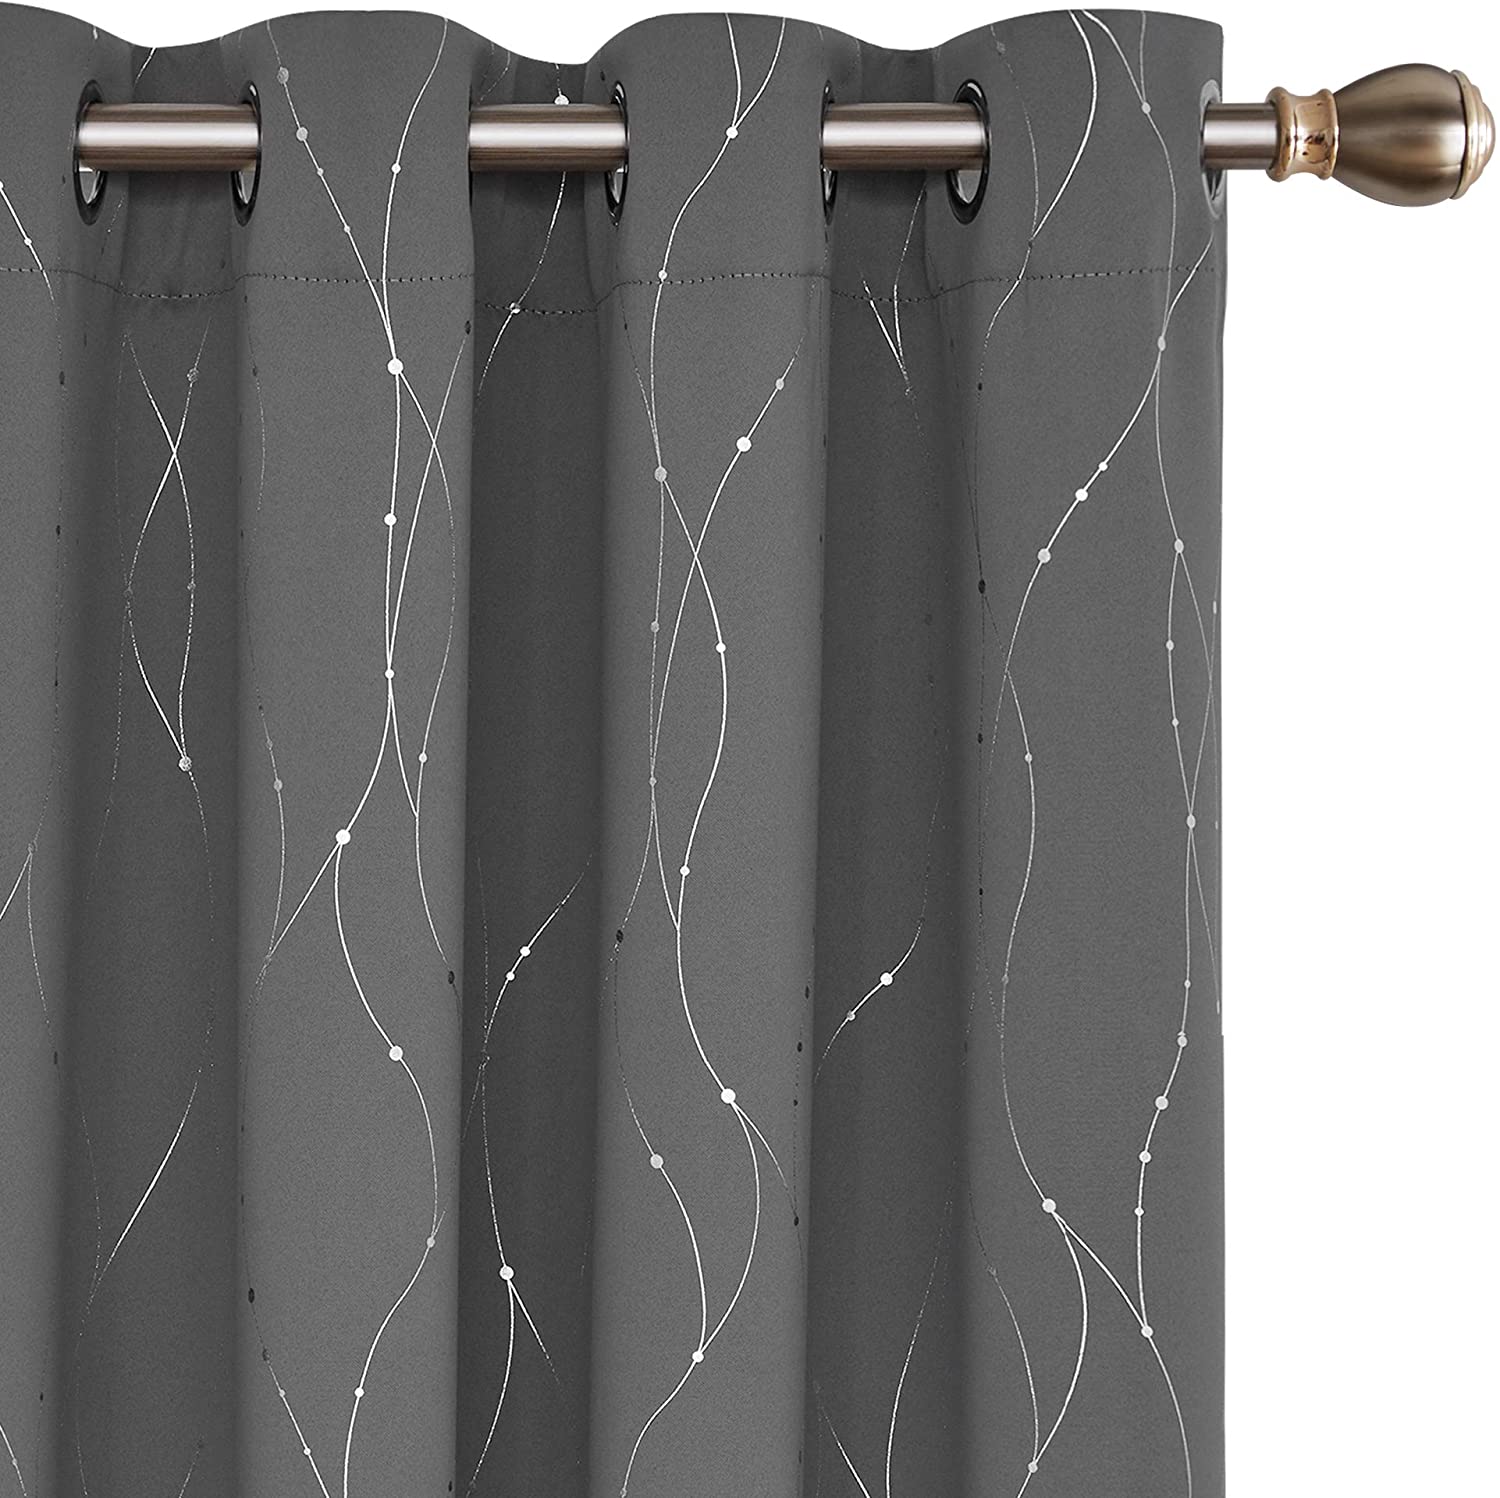 Texlab Blackout Curtains for Bedroom Grommet Thermal Insulated Summer Heat/Win 